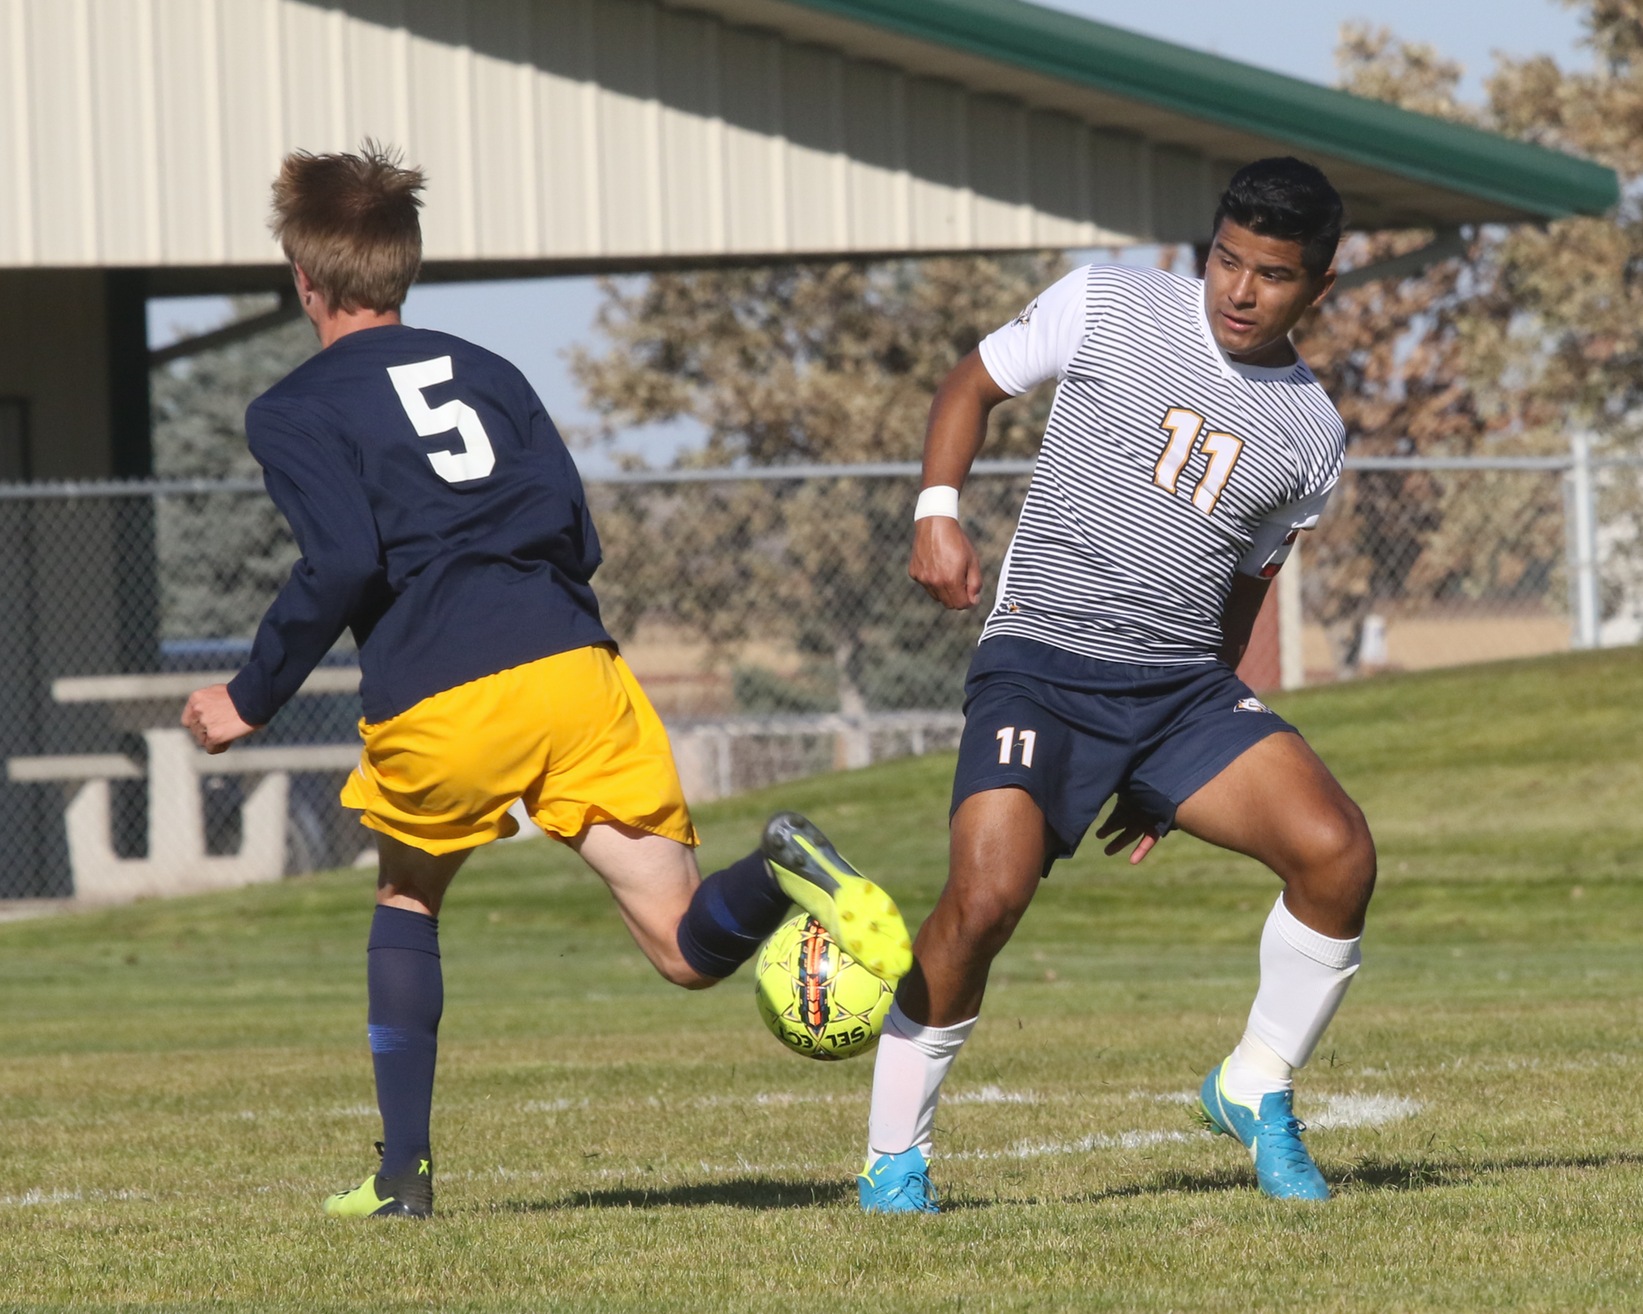 WNCC men fall to LCCC 1-0 in regional tourney